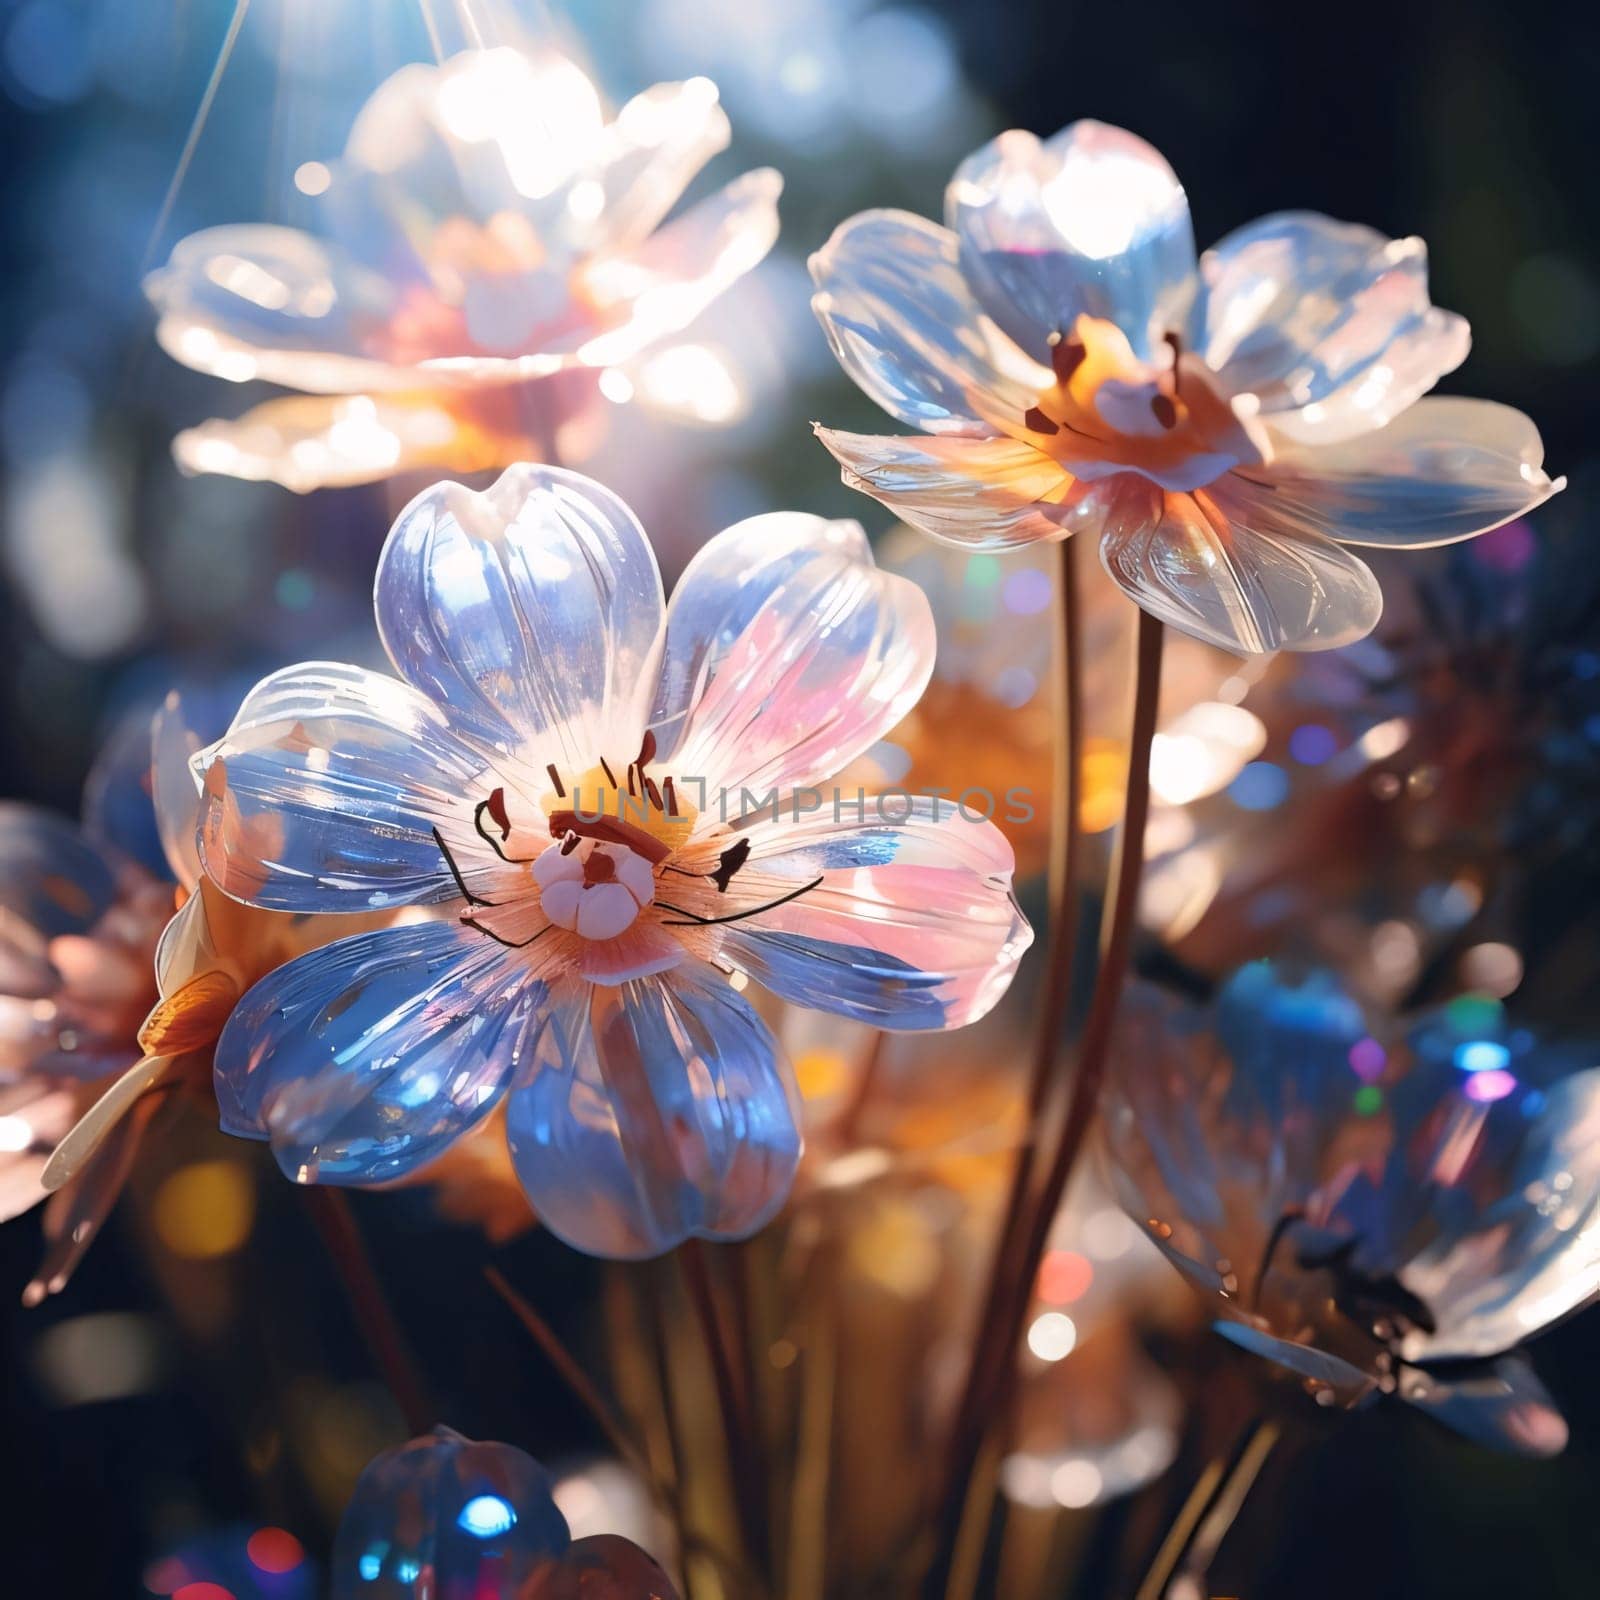 Flowers with transparent leaves in the evening rays of the sun. Flowering flowers, a symbol of spring, new life. by ThemesS